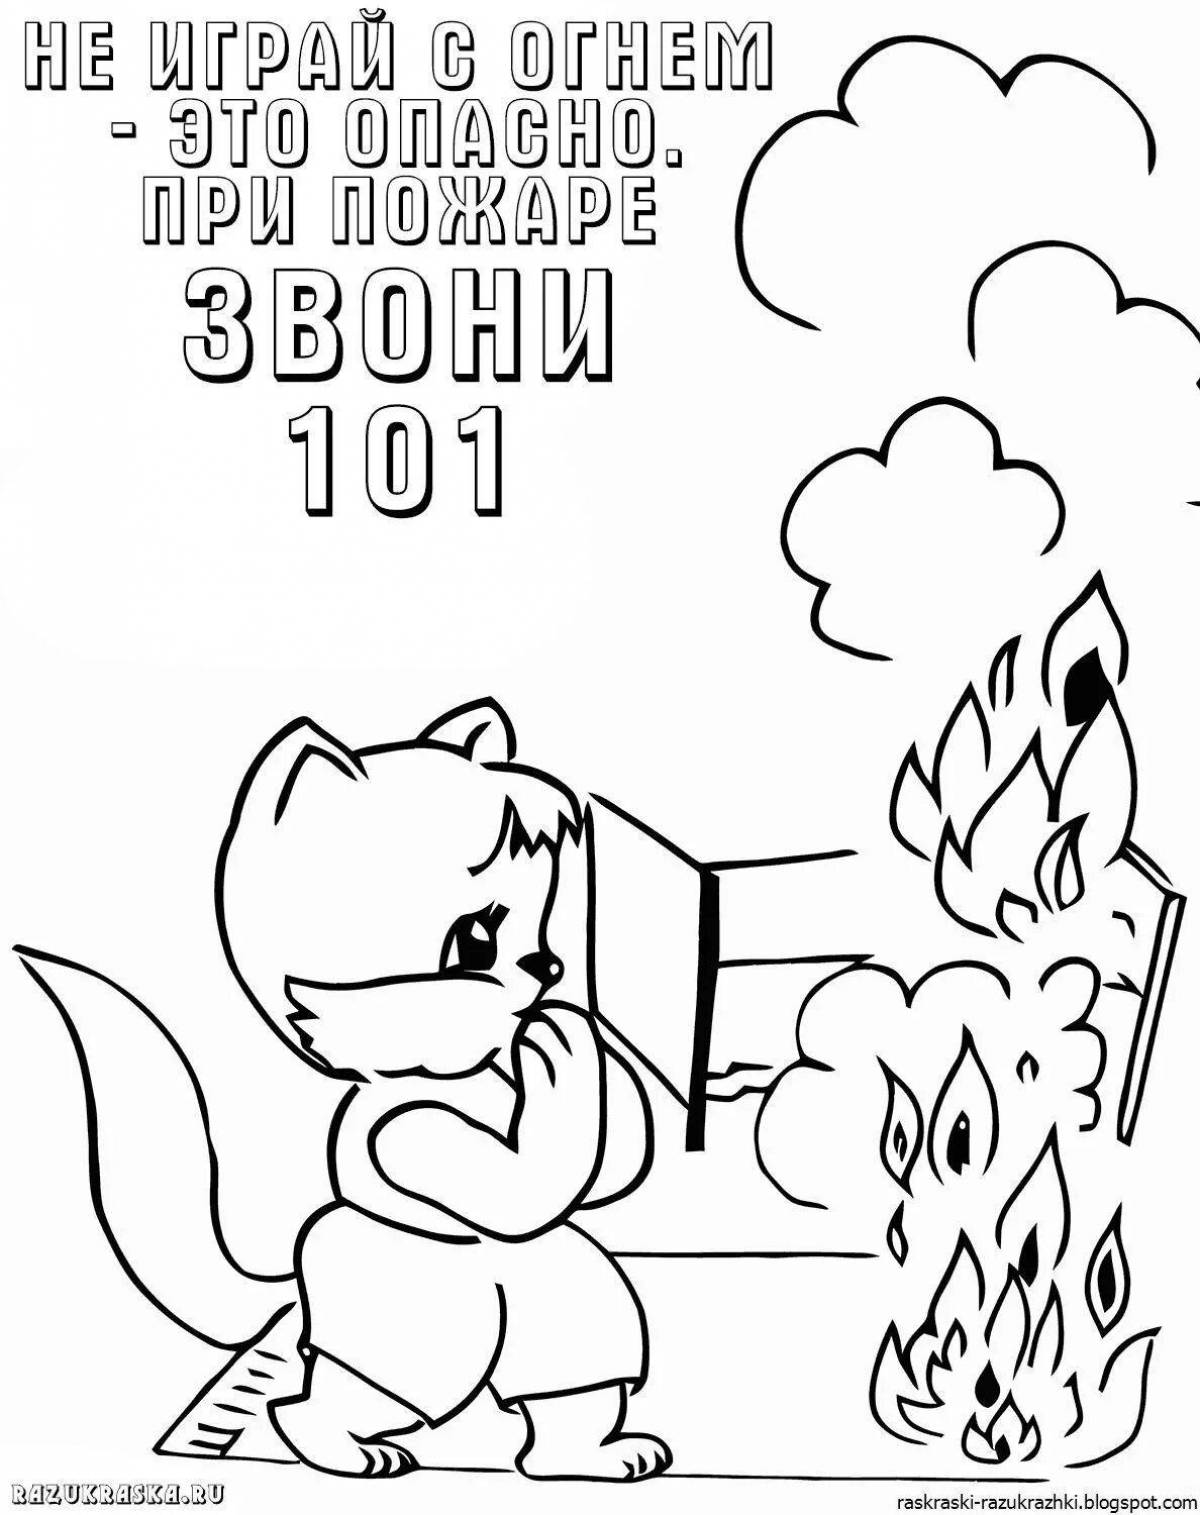 Great fire safety video coloring page